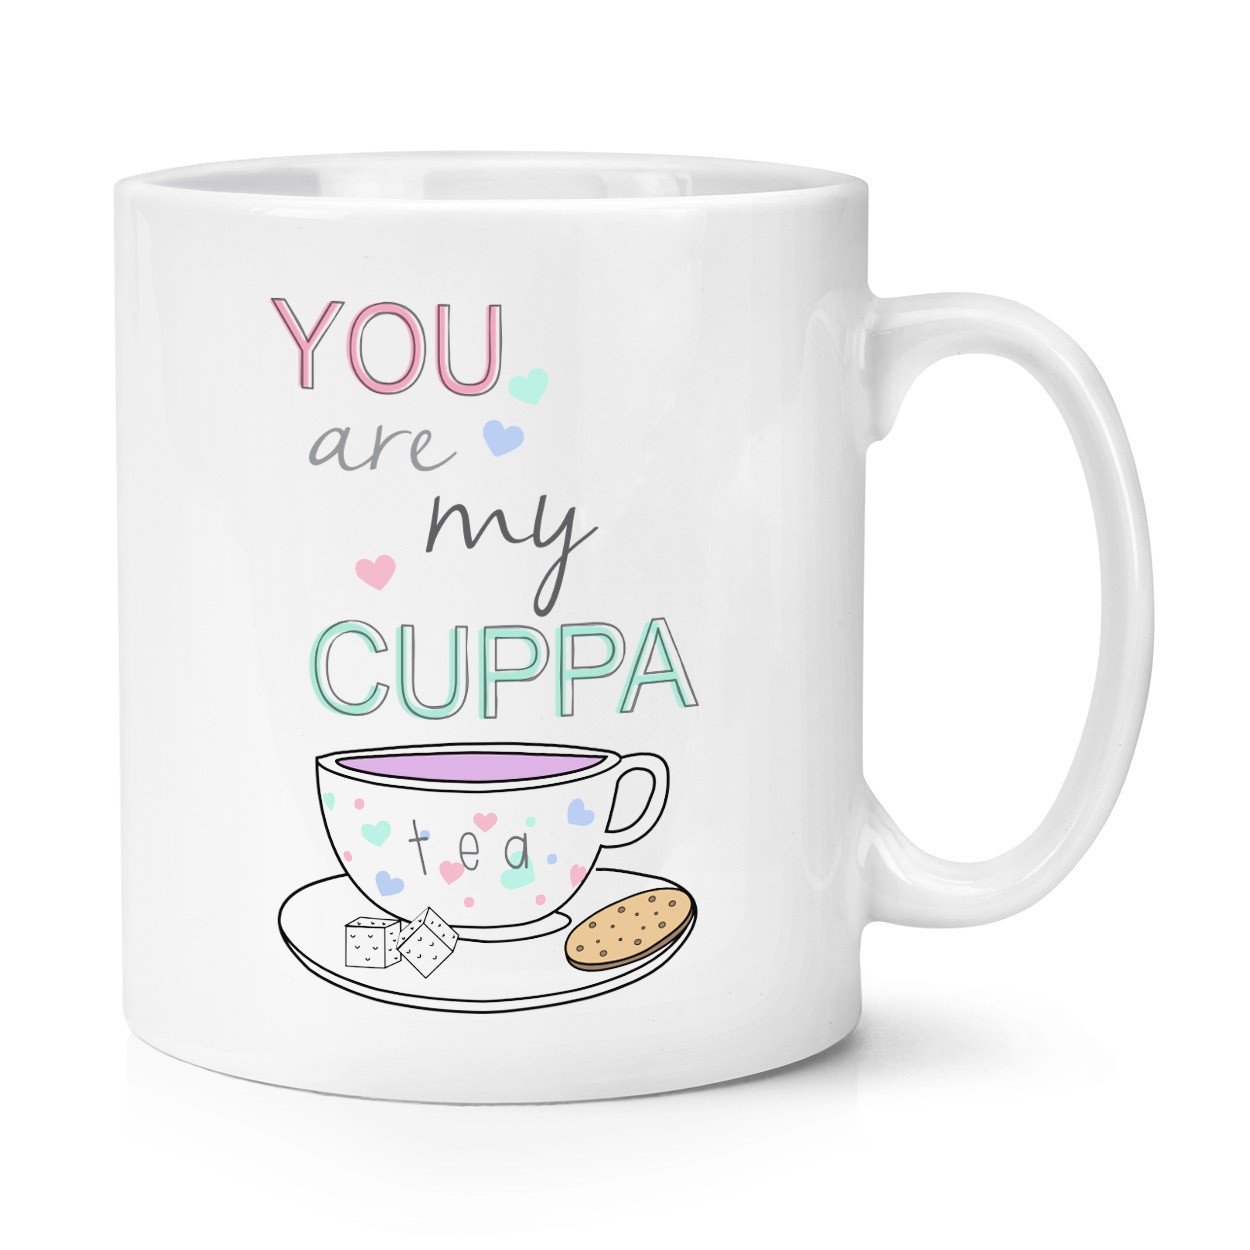 You Are My Cuppa Tea Quote 10oz Mug Cup